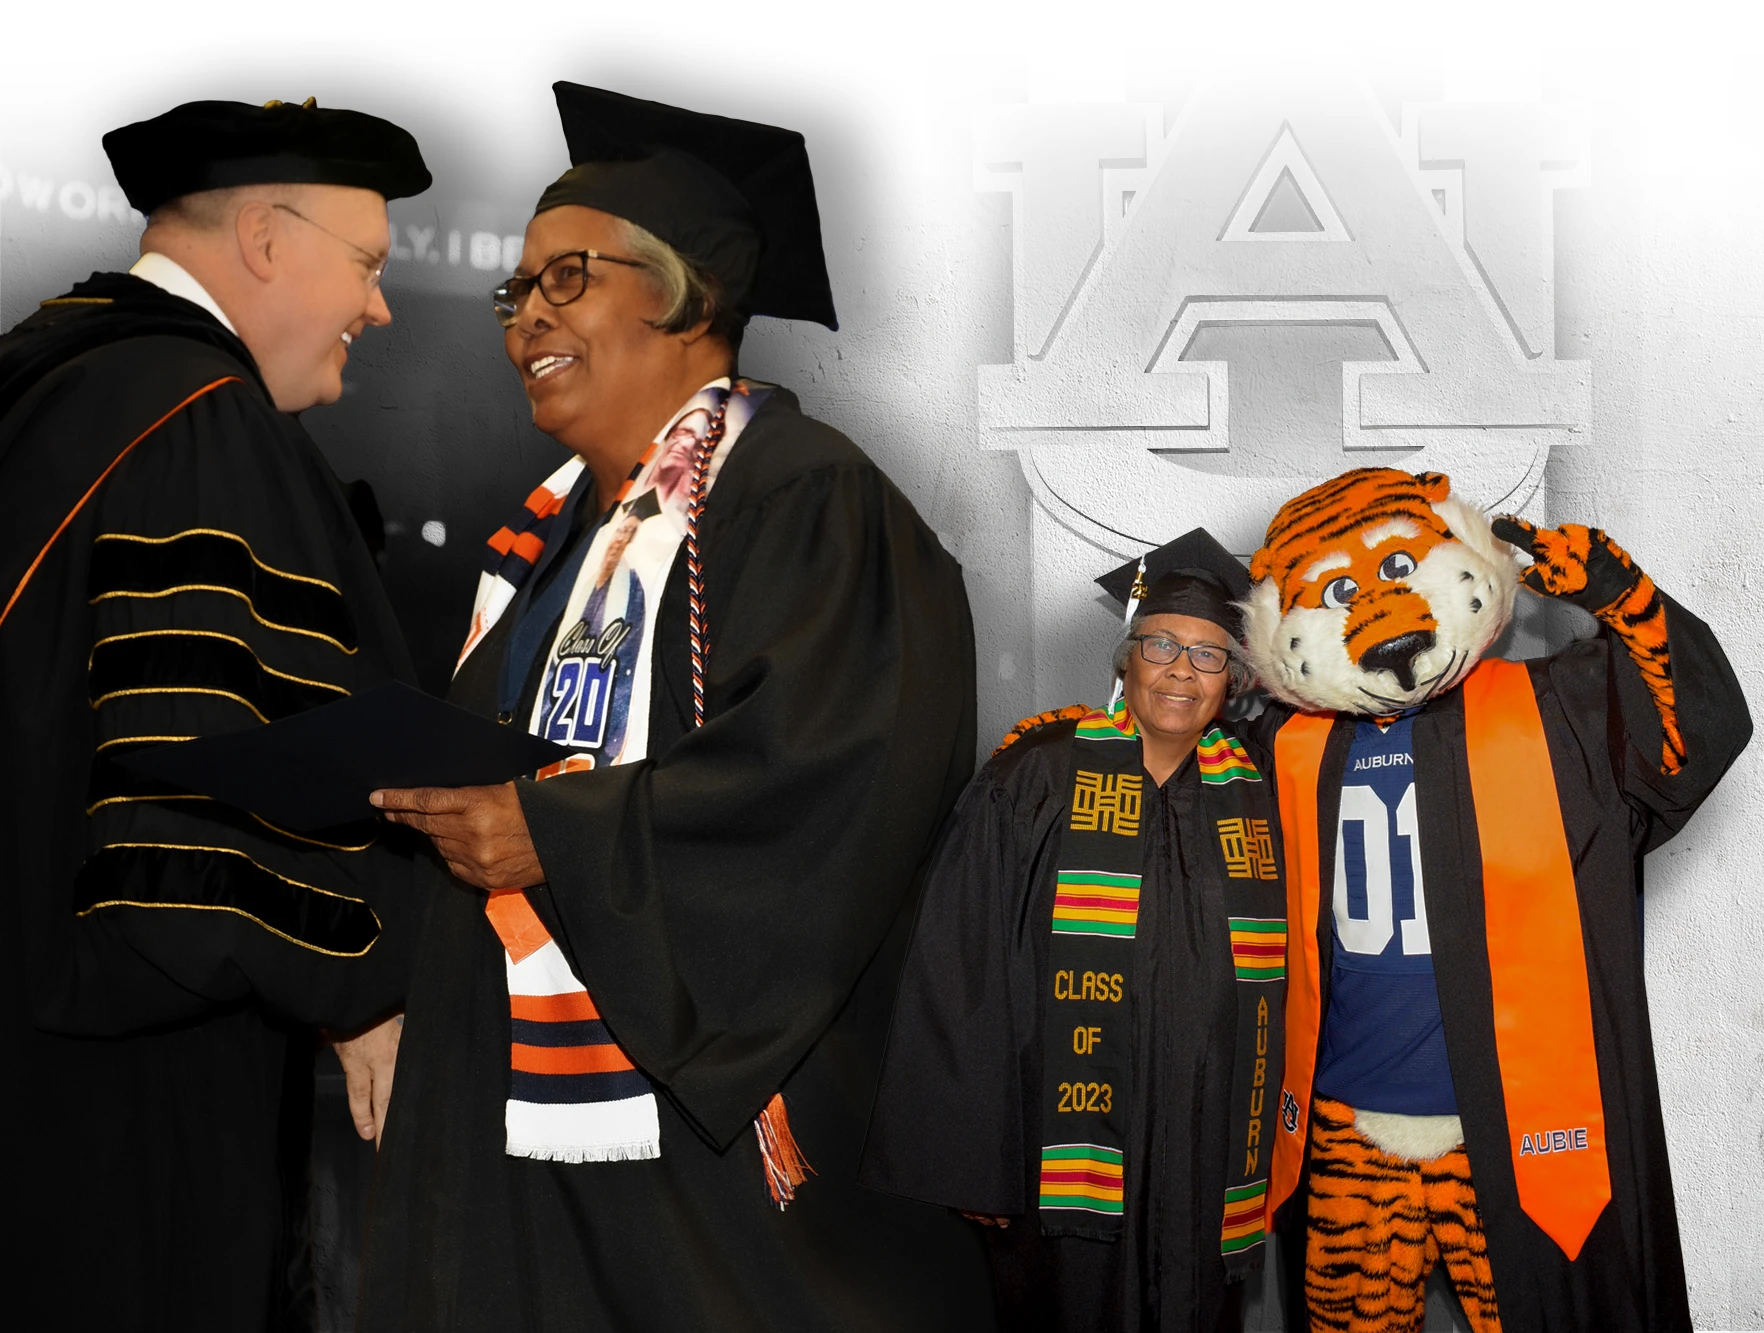 Sherry with President president Roberts and Sherry with Aubie